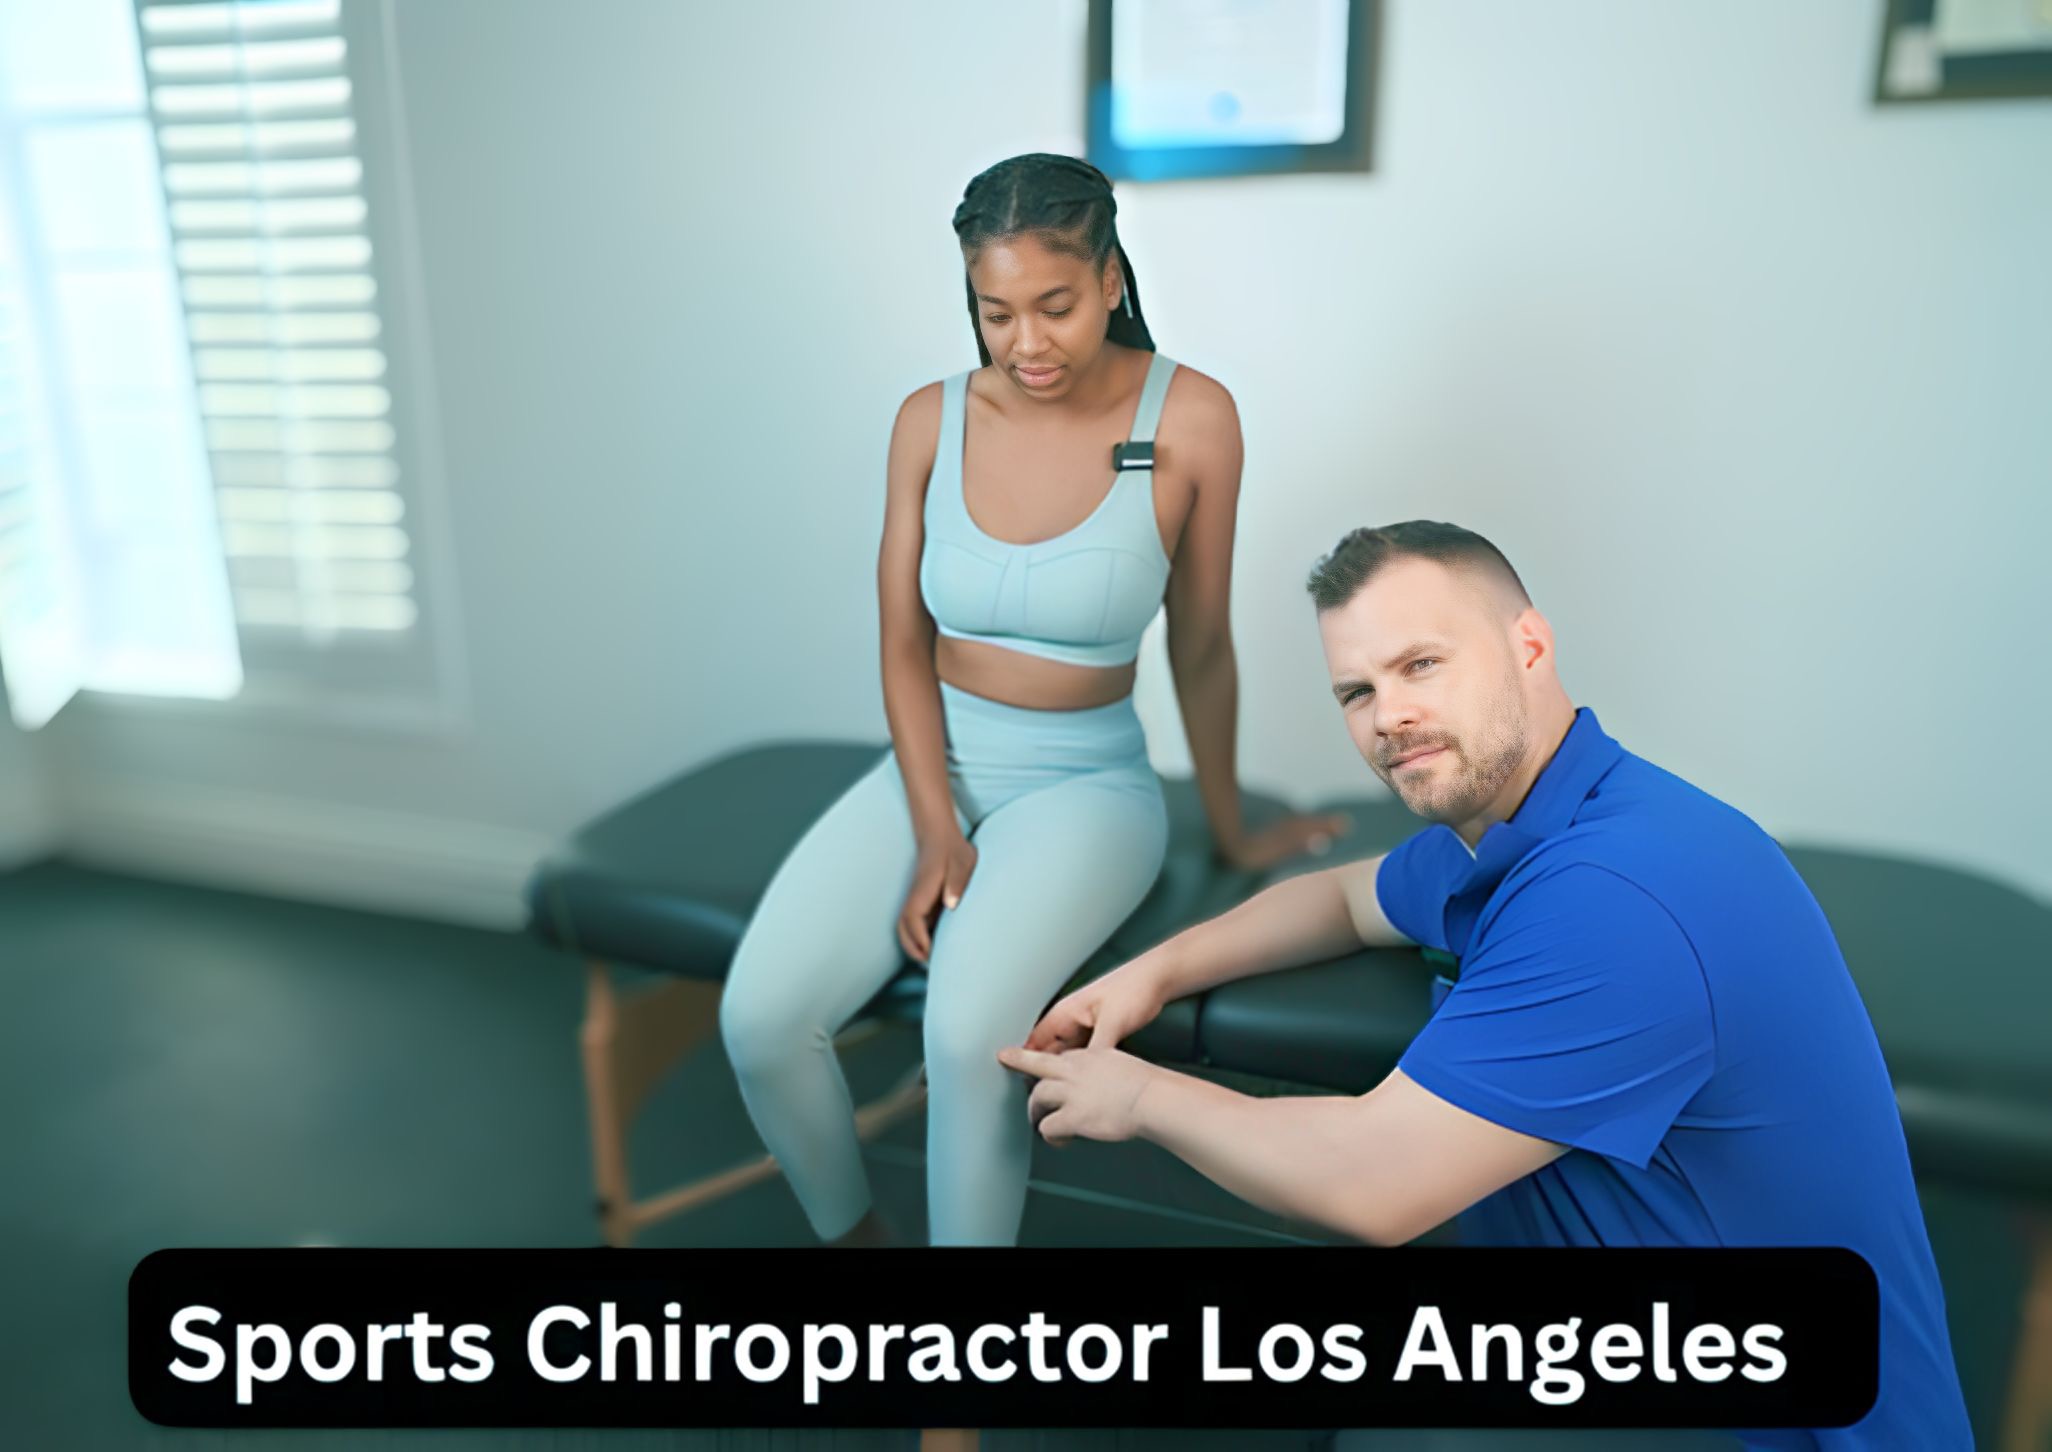 Sports Chiropractor in Los Angeles performing a knee exam on Athlete